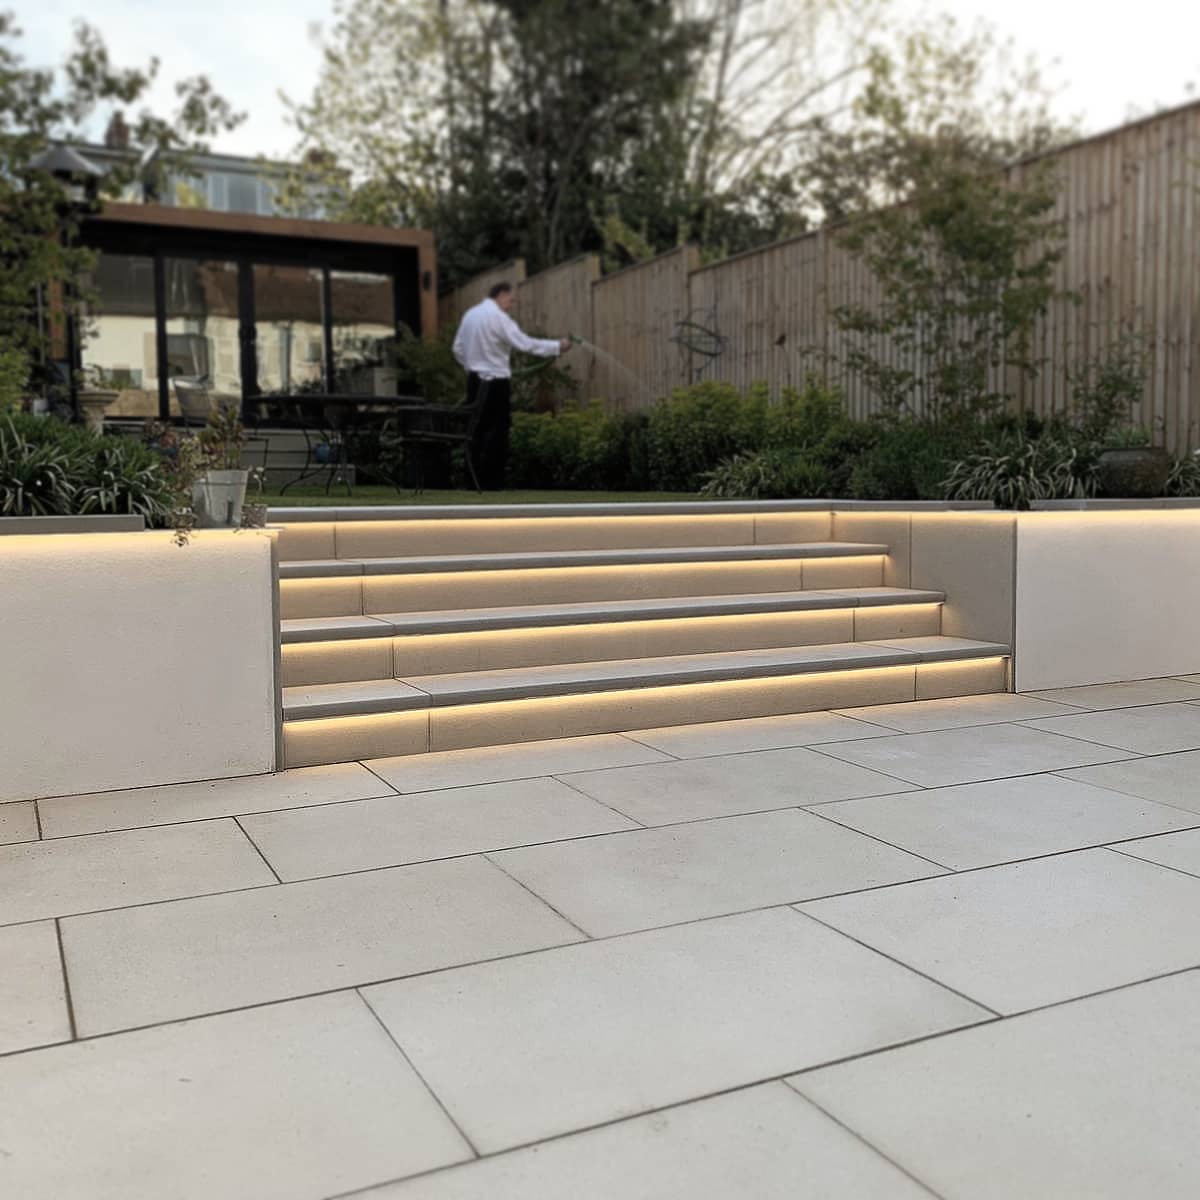 Bota Group Ltd, Construction Company London UK, has fast grown into a building contractor that is proud of its reputation & customer satisfaction Landscaping Services London | Bota Group Ltd Landscaping Company London specialized in: Outbuildings,Bespoke Sheds, Lighting Installation, Patios & Paths... Landscaping Company London Building Contractors London UK - Bota Group Ltd was founded in 2017 & has fast grown into a building contractor for construction, developments & landscaping Bota Group Ltd, Construction Company London, has fast grown into a building contractor that is proud of its reputation & customer satisfaction